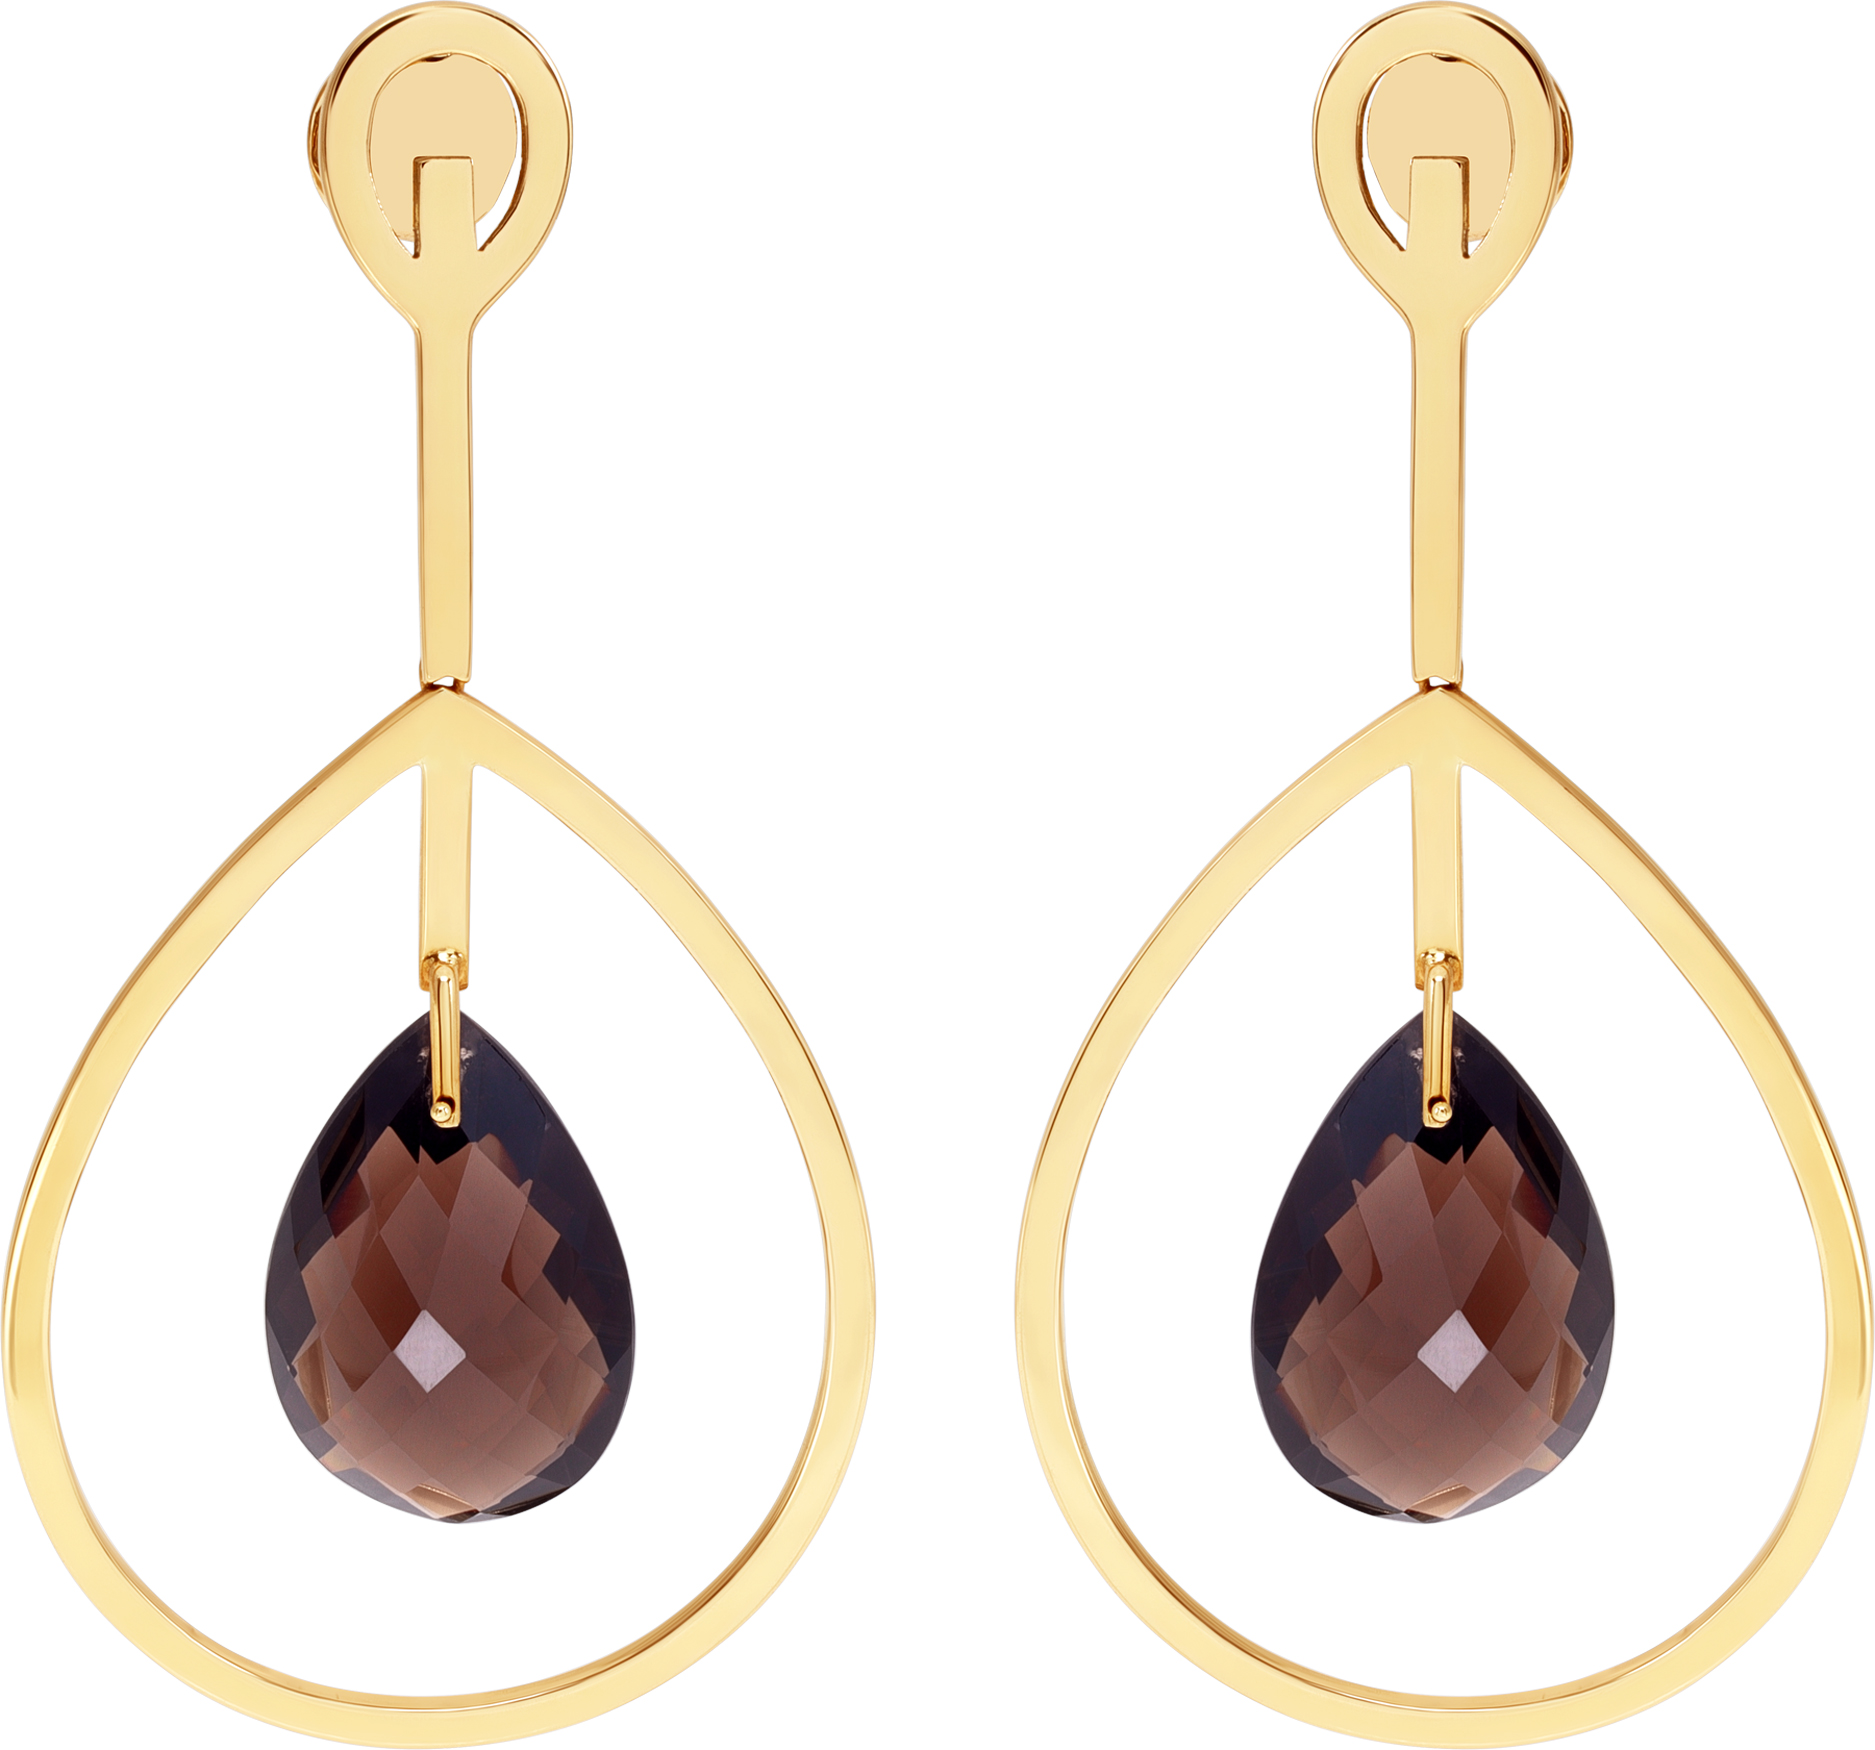 Smokey topaz earrings framed with a large pear shape hoop of 18k yellow gold